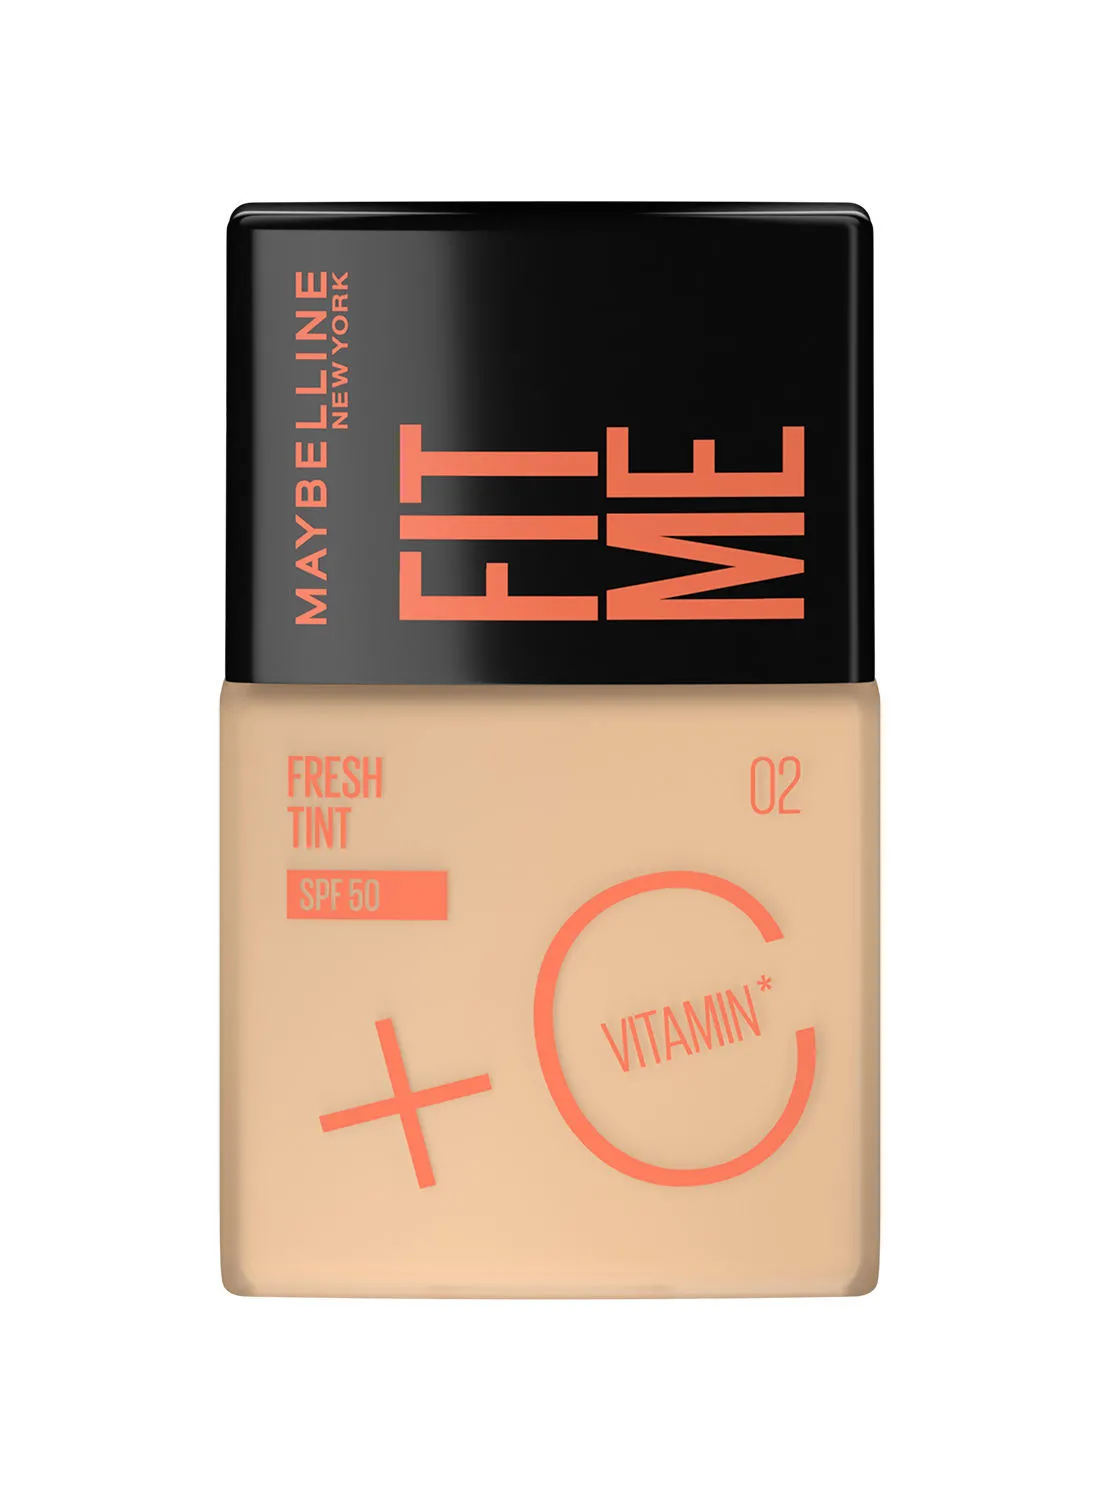 MAYBELLINE NEW YORK Maybelline New York, Fit Me Fresh Tint SPF 50 with Brightening Vitamin C, 02